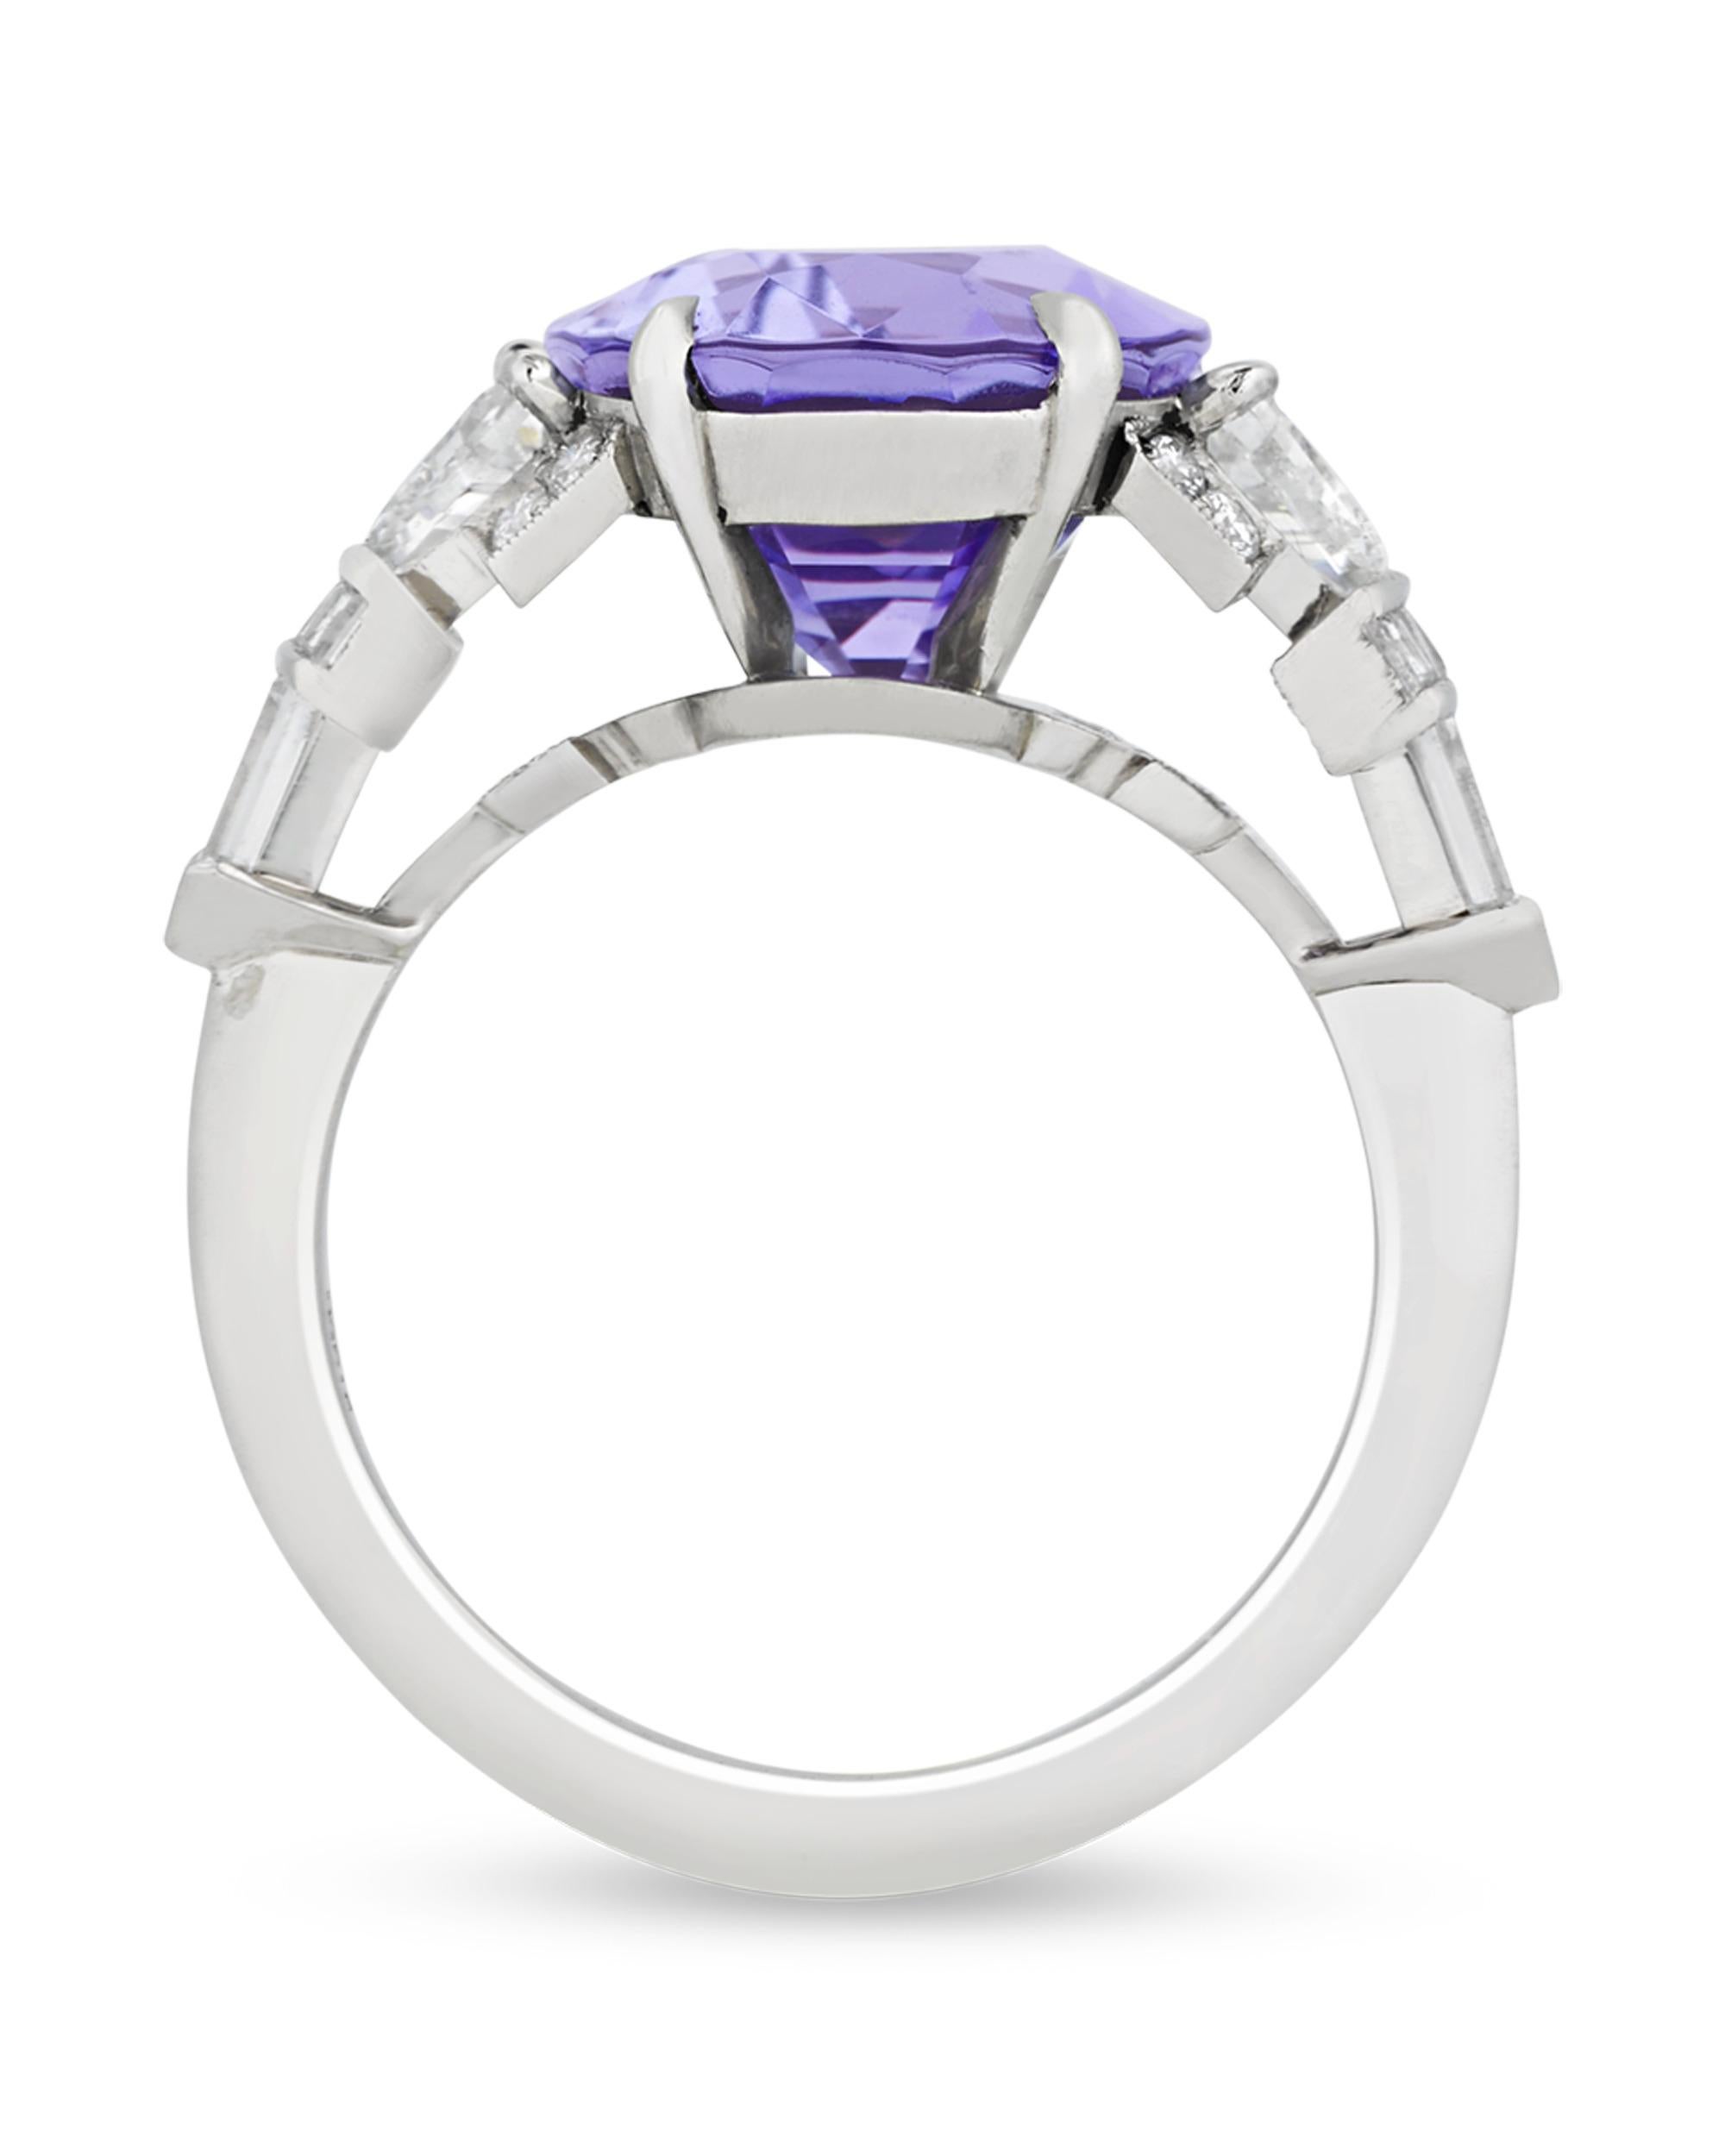 Displaying a remarkable and romantic lavender hue, the cushion-cut tanzanite that centers this Raymond Yard ring weighs an impressive 6.97 carats. The cool purple tones of the stone are finely accented by additional trapezoid, bullet, square and